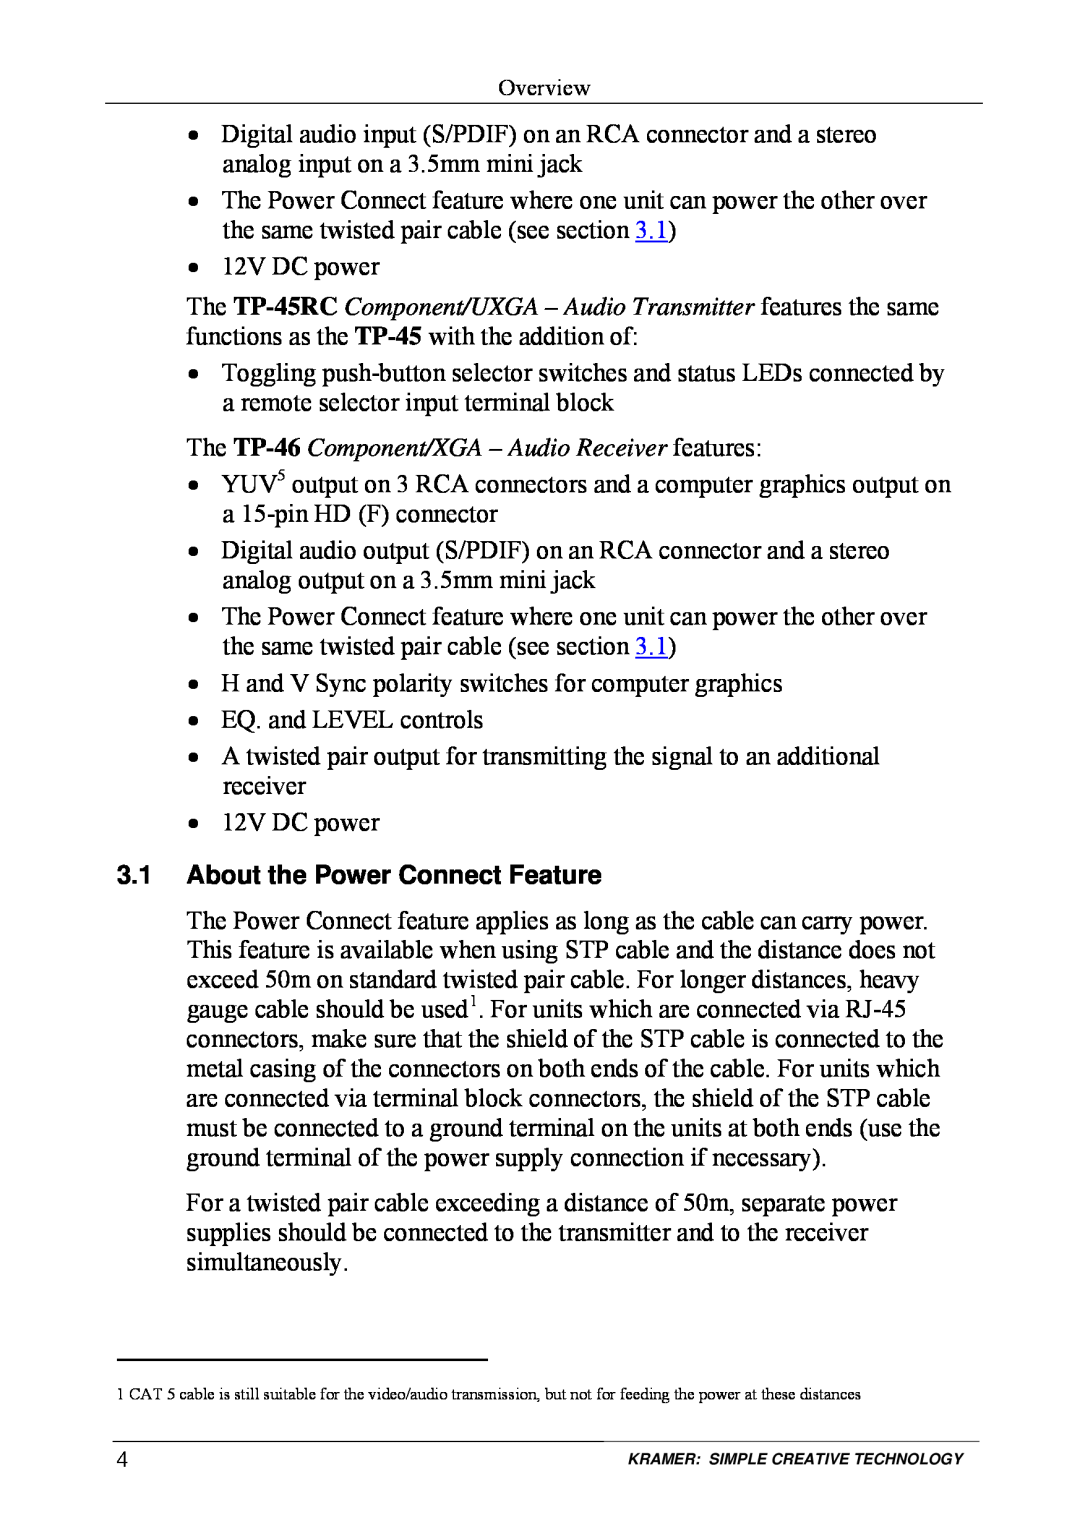 Kramer Electronics TP-45 user manual The TP-46 Component/XGA - Audio Receiver features, About the Power Connect Feature 